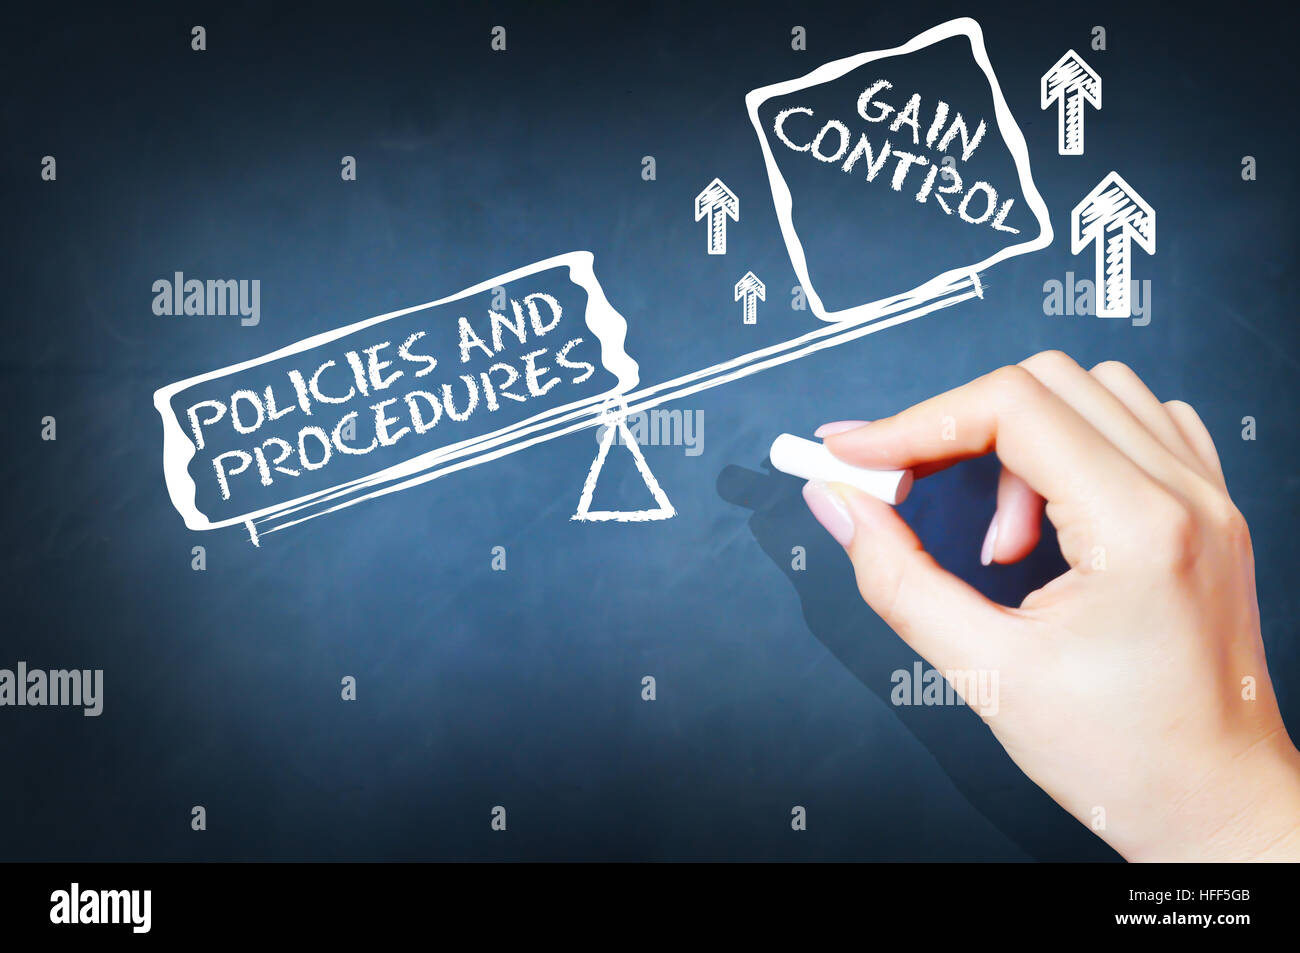 Company policies and procedures concept on blackboard with seesaw Stock Photo